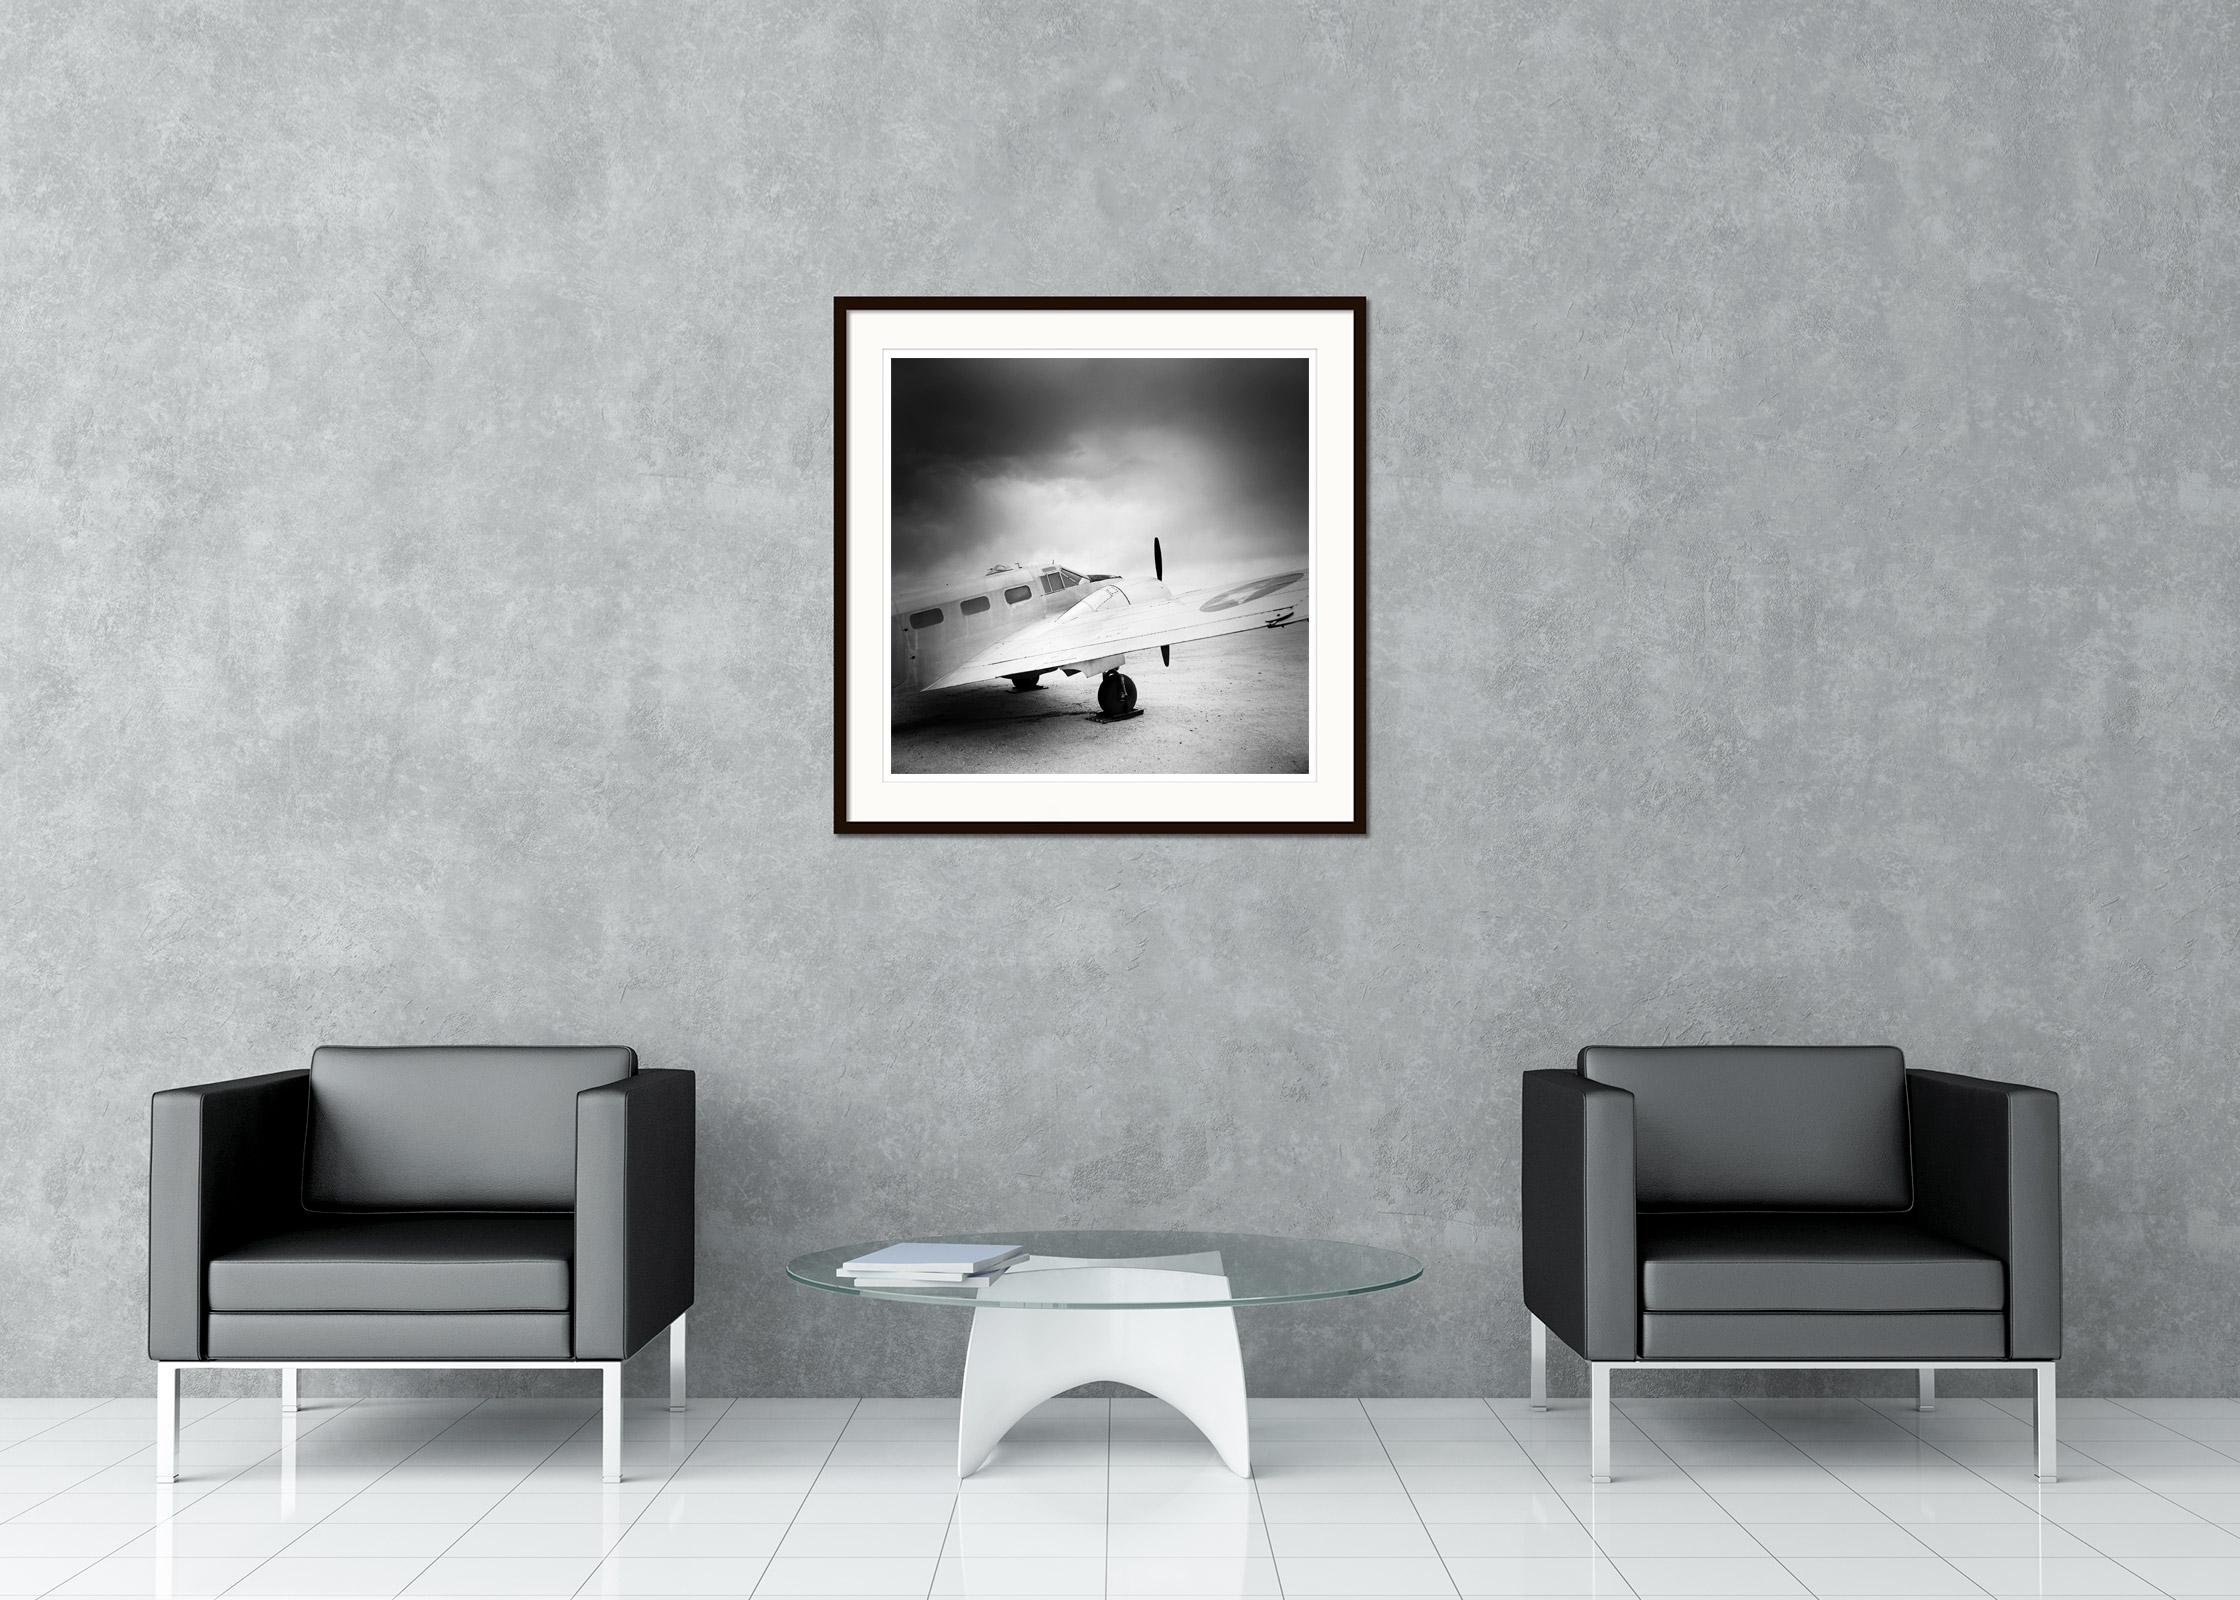 Black and White Fine Art landscape photography - Airplane Beechcraft AT-7 Navigator on an airfield in Arizona, USA. Archival pigment ink print, edition of 9. Signed, titled, dated and numbered by artist. Certificate of authenticity included. Printed